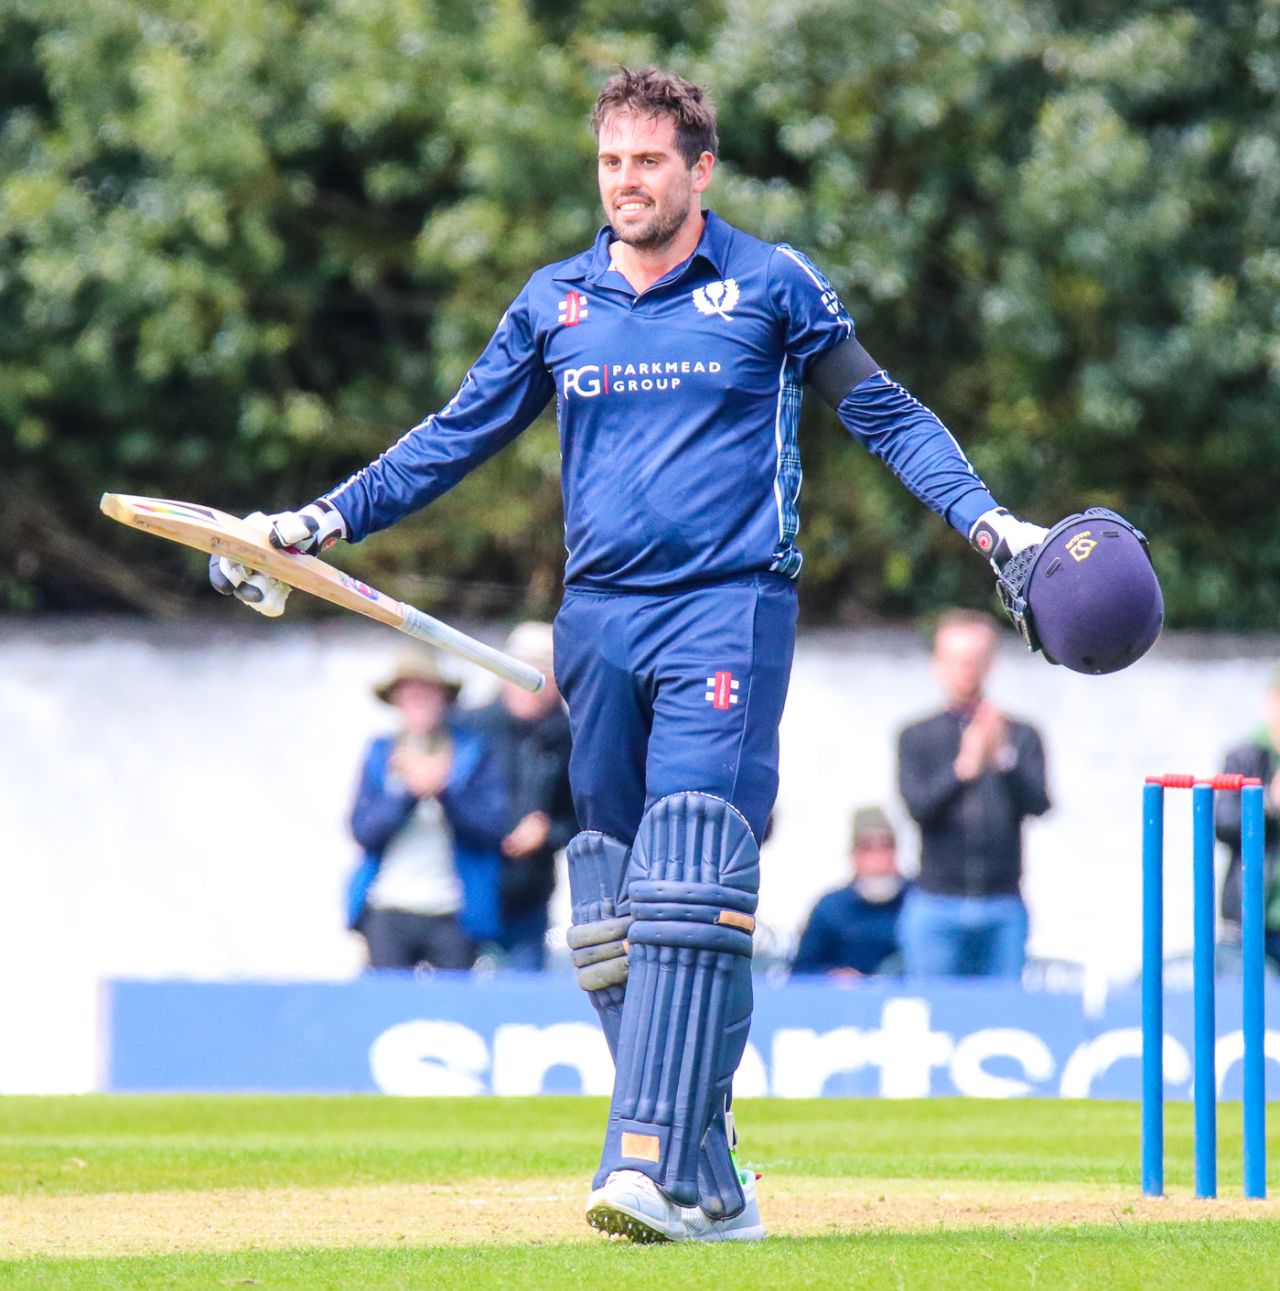 Calum MacLeod grins after reaching his second consecutive ODI century v Afghanistan, Scotland v Afghanistan, 2nd ODI, Edinburgh, May 10, 2019